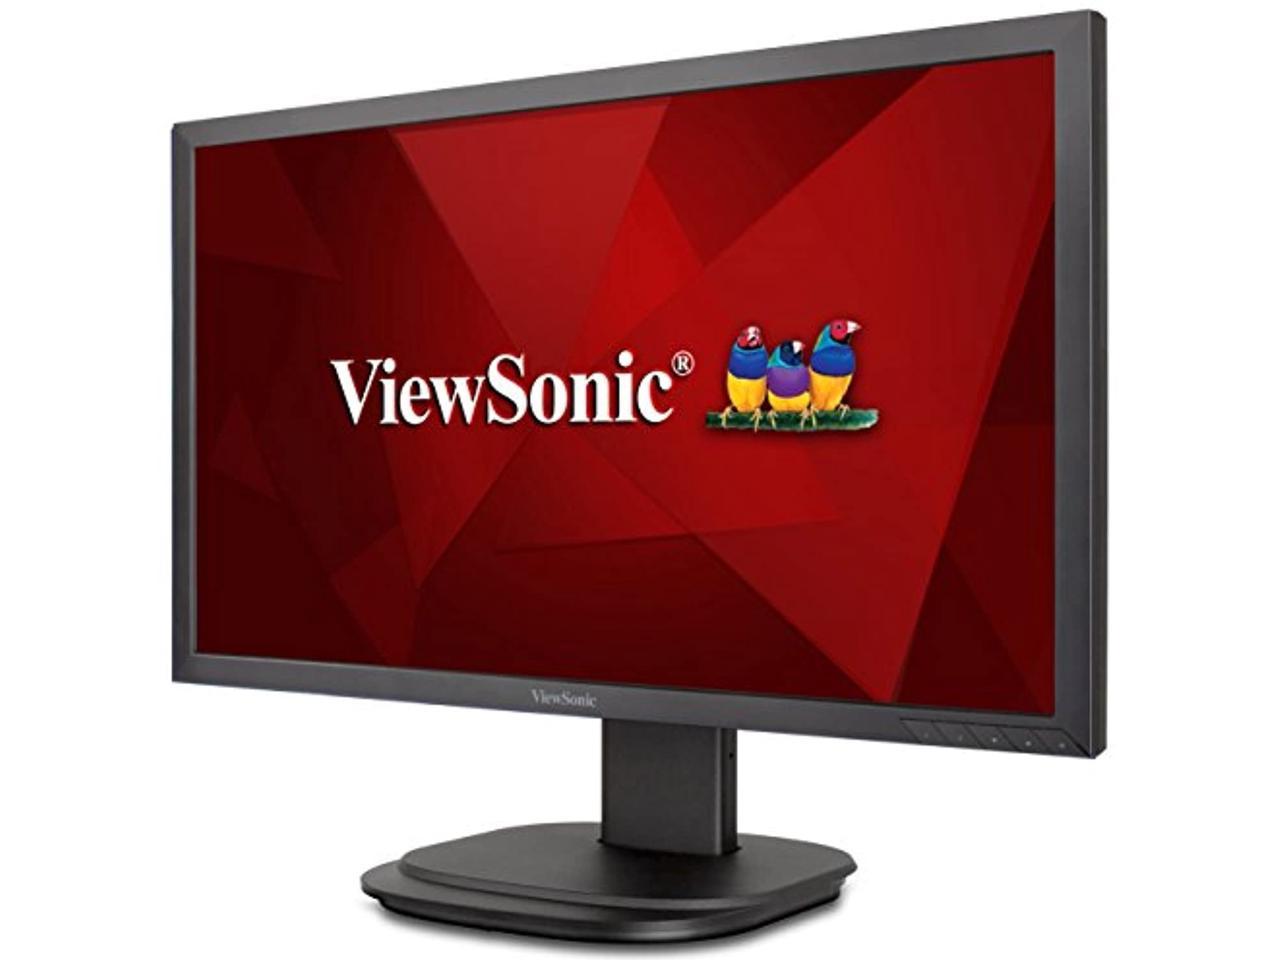 ViewSonic VG2239SMH 1080p Ergonomic Monitor with HDMI DisplayPort and VGA for Home and Office (VG2239SMH)